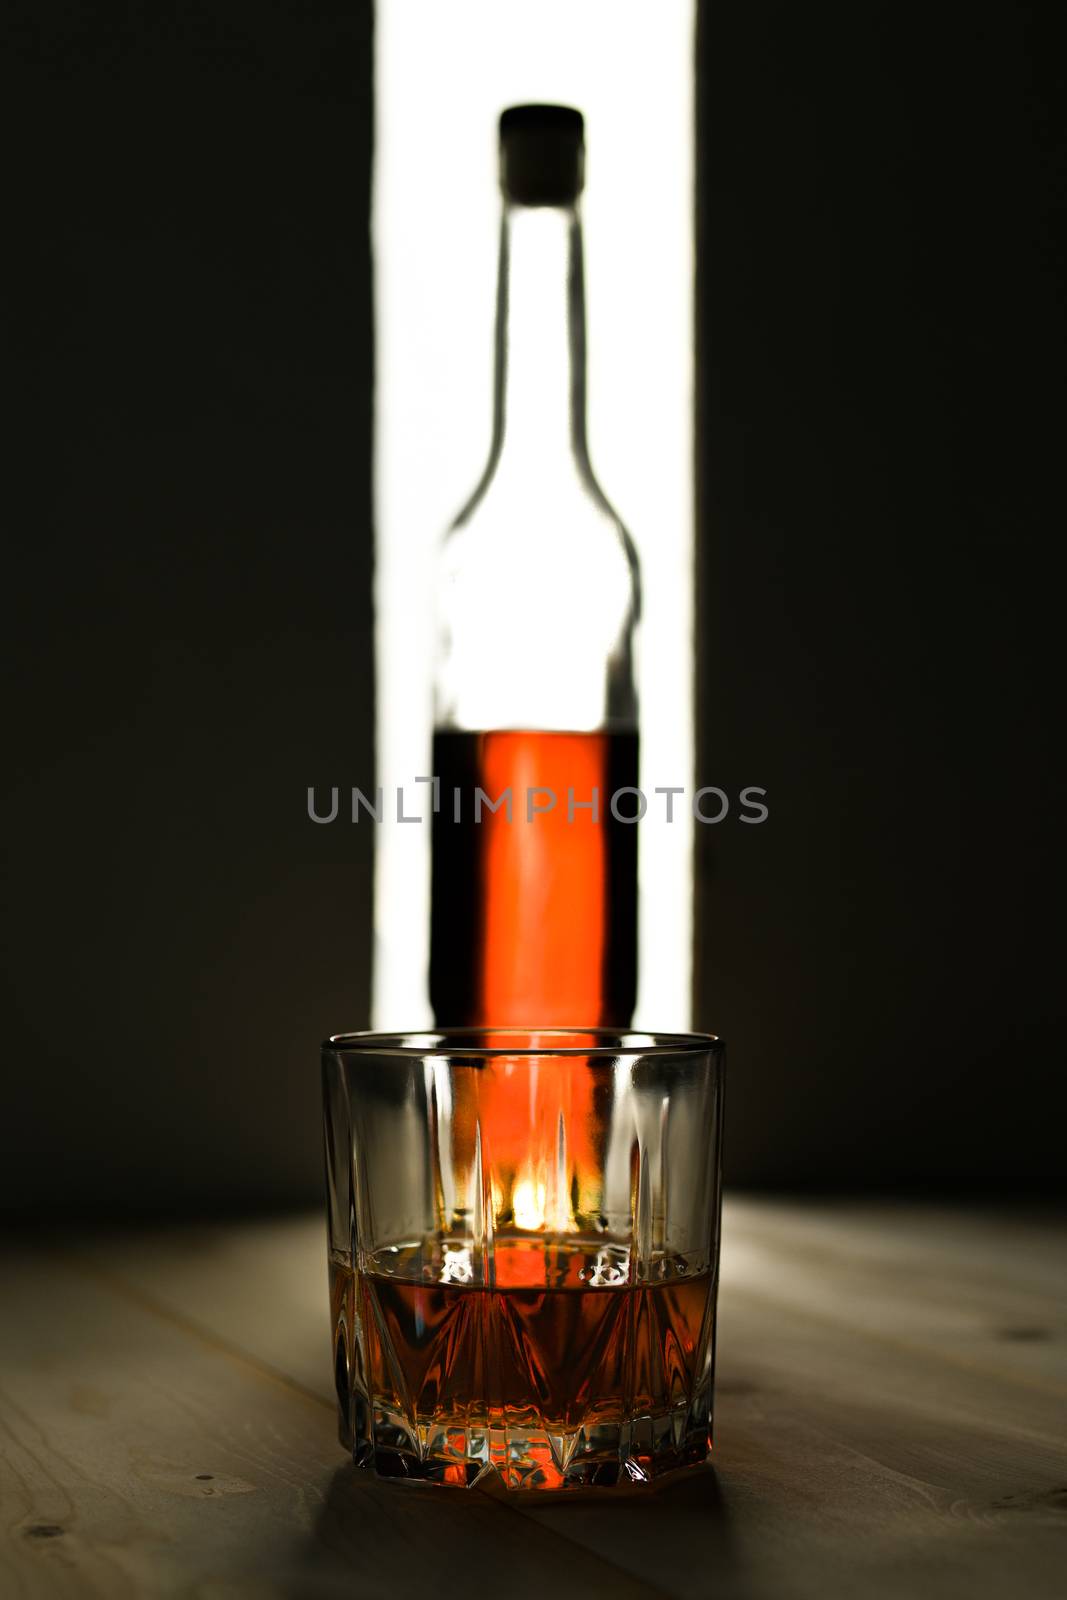 Bottle and glass of cognac over dark and white background. by sashokddt